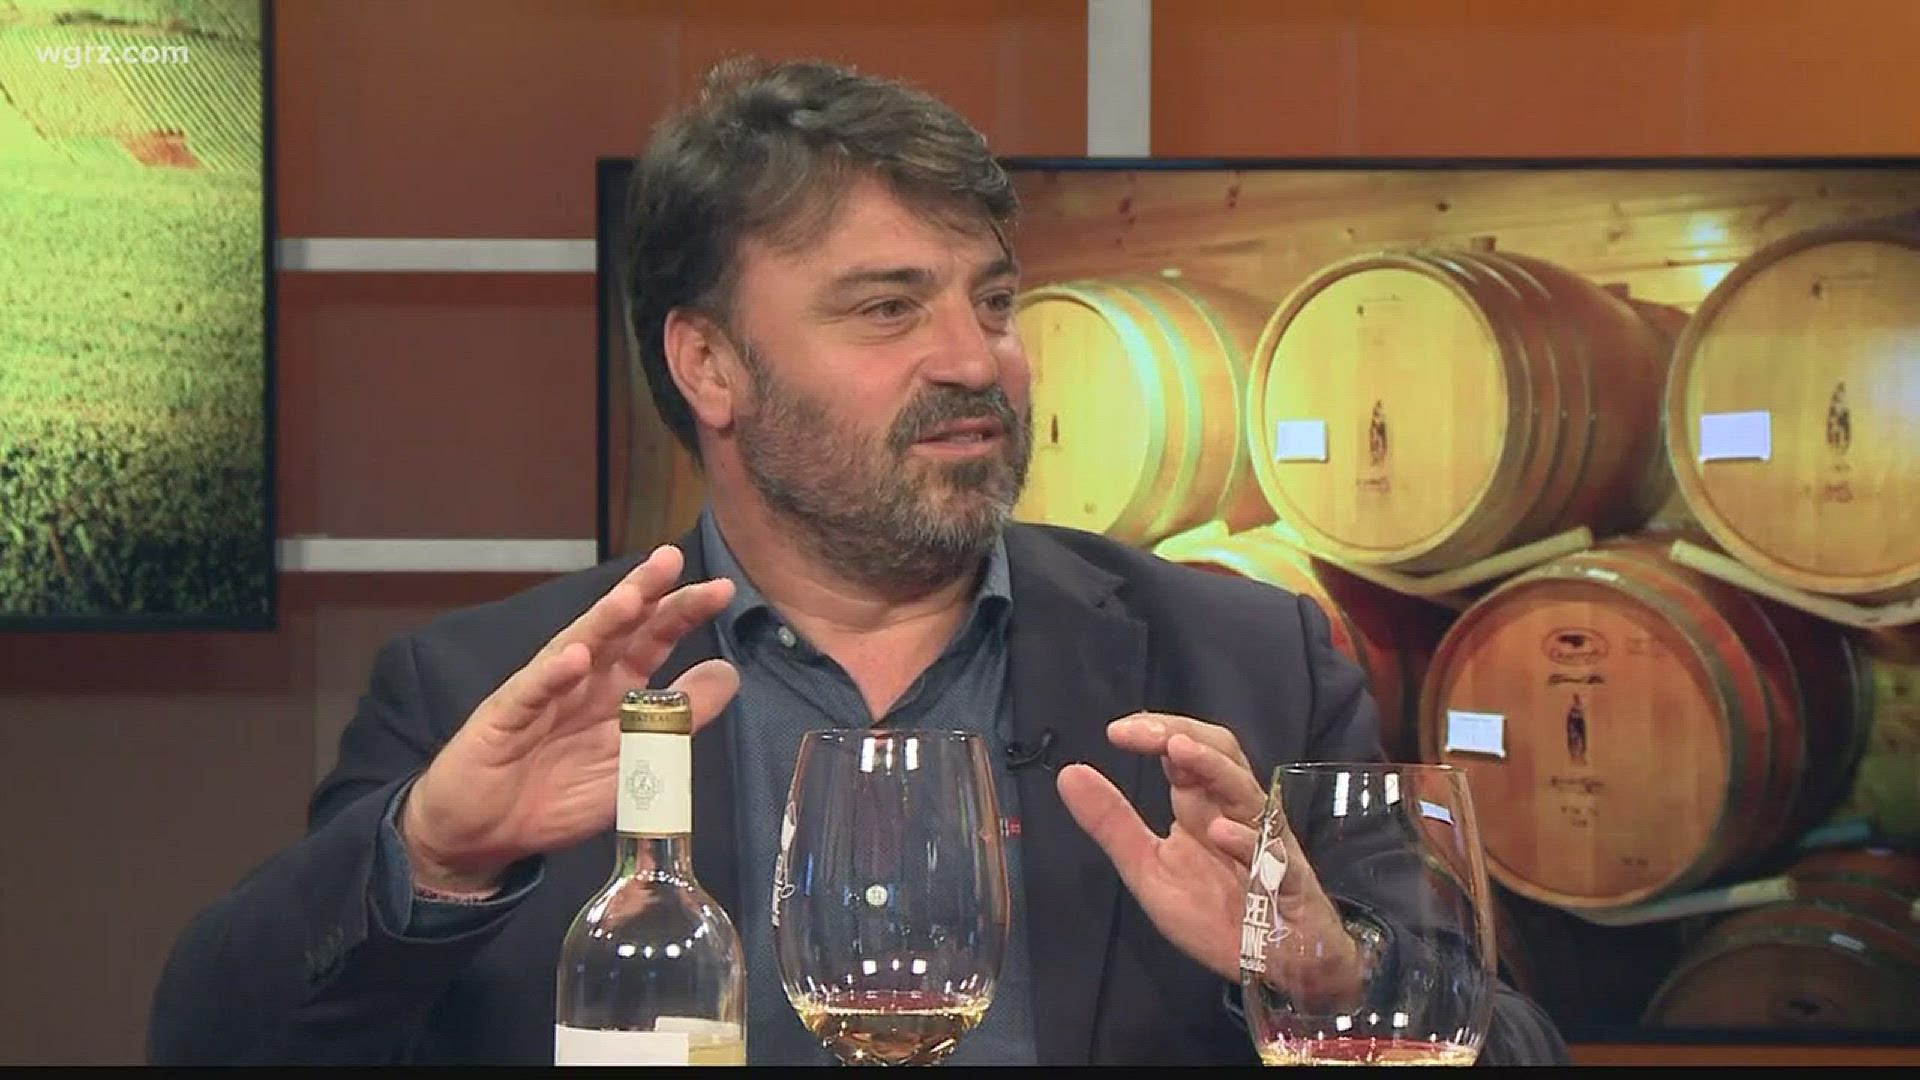 Kevin is joined by Stephane Dupuch to discuss the Chateau Sainte-Marie White Wine of the Week.